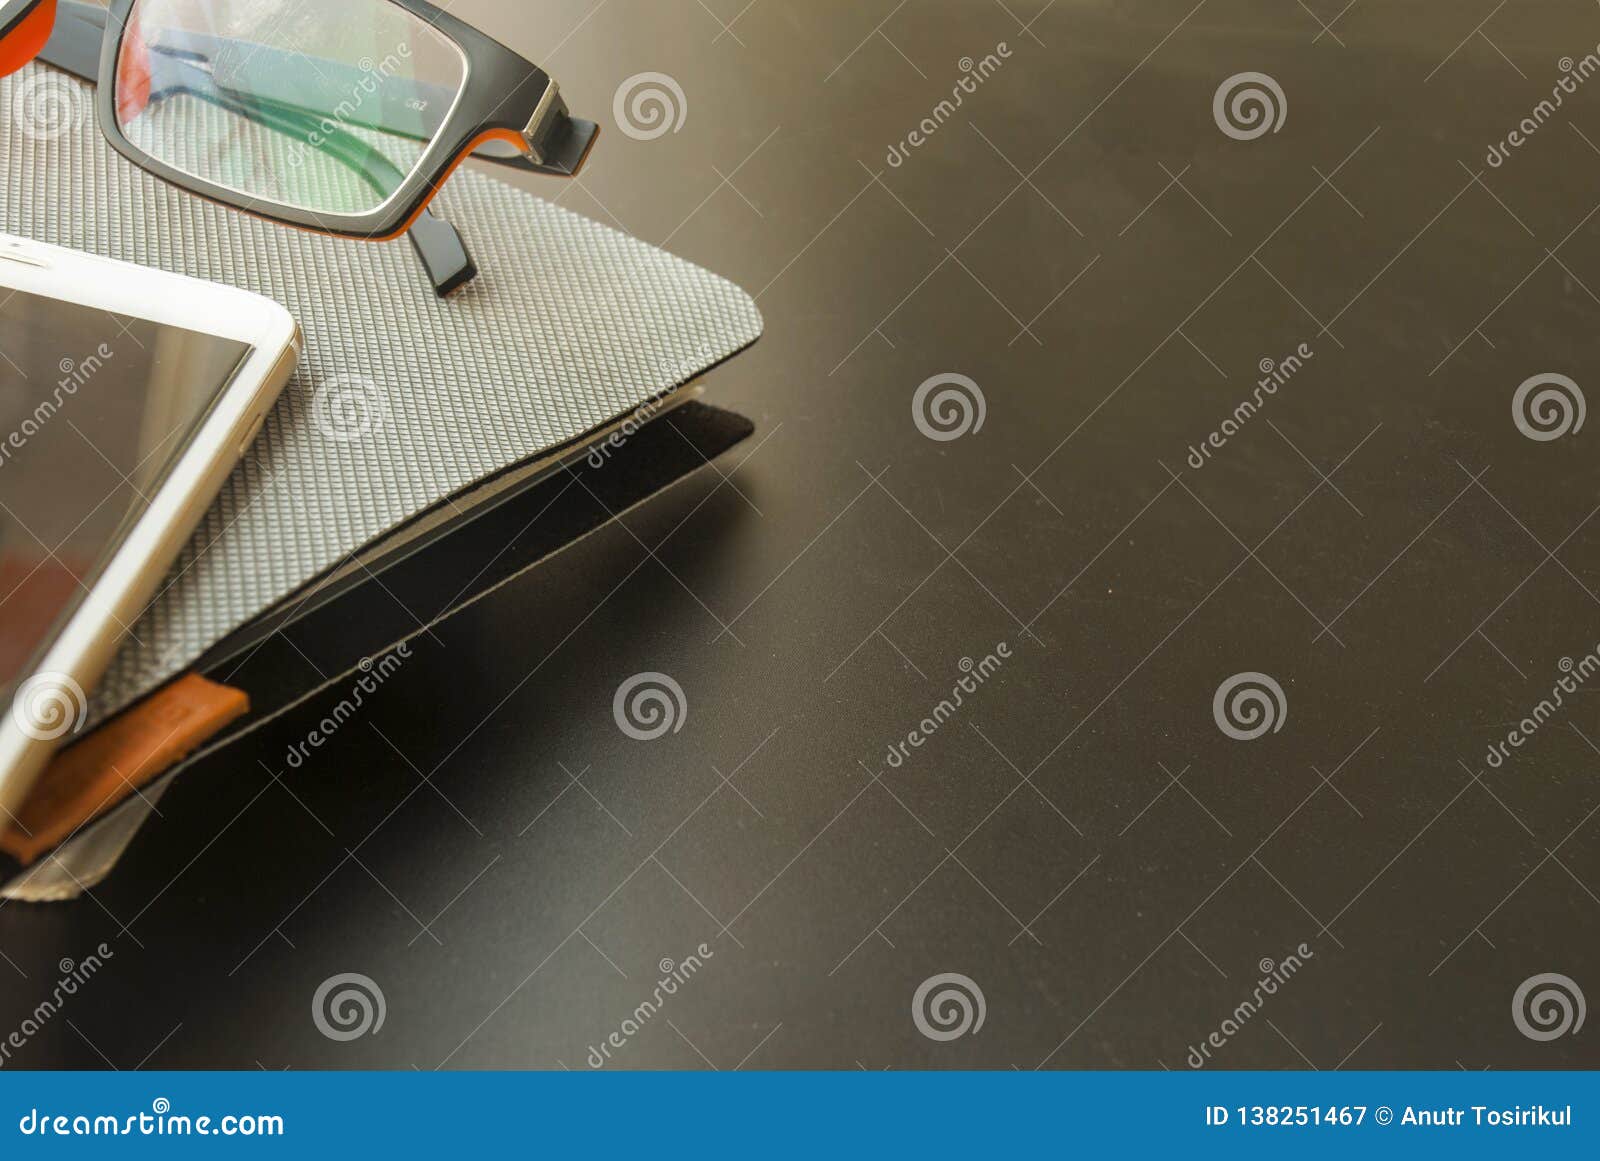 Notebooks And Mobile Phones Glasses In The Desk Stock Image